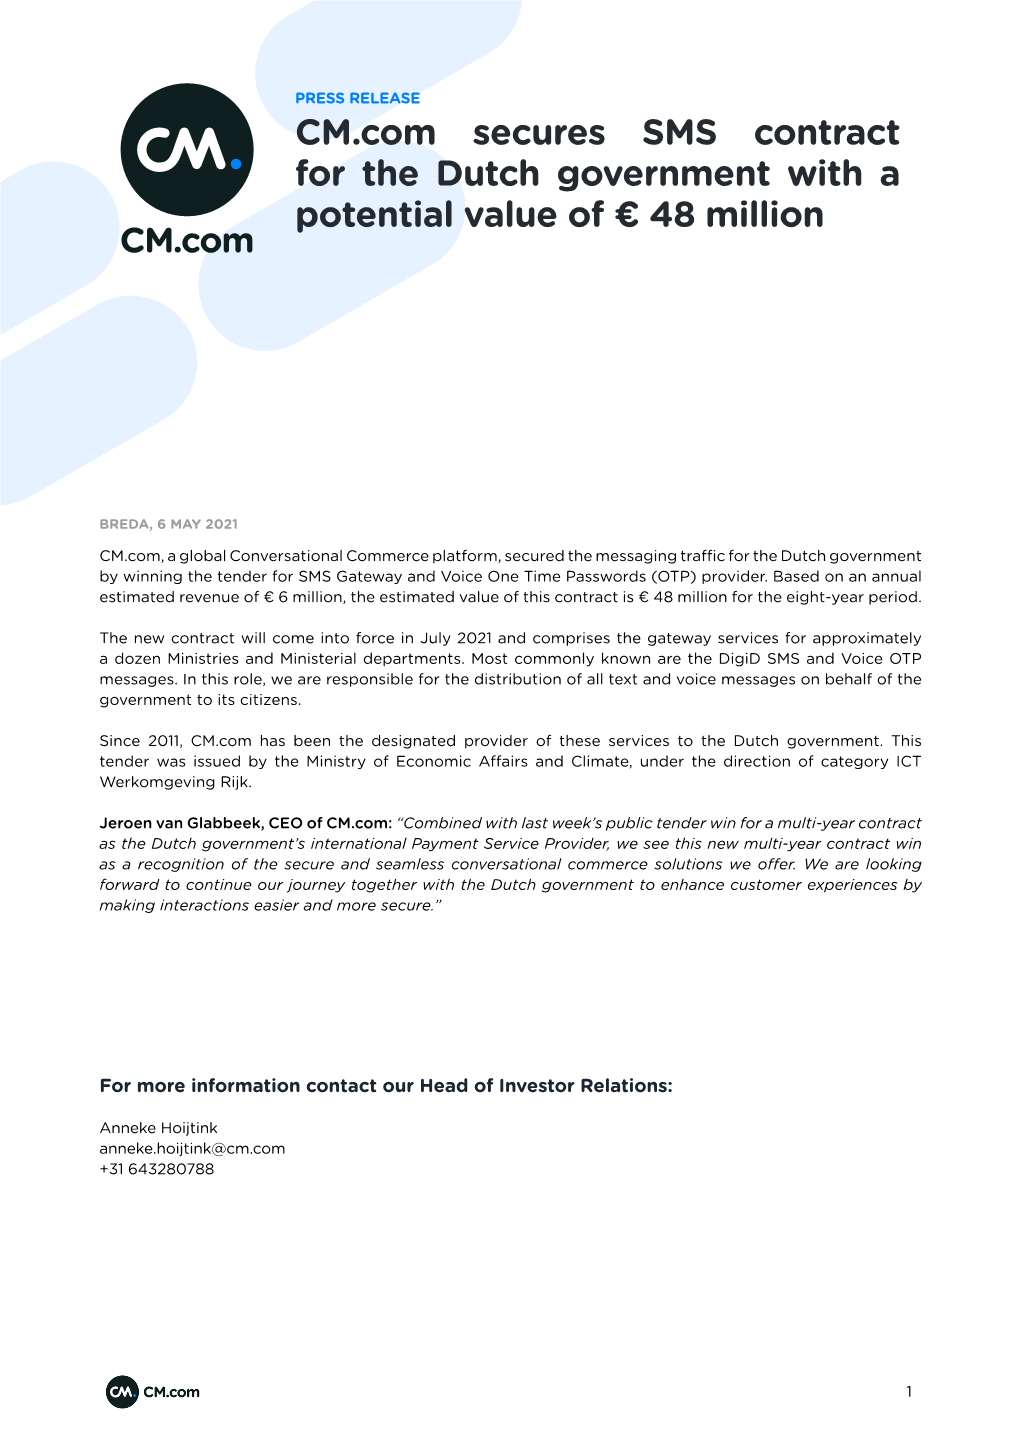 CM.Com Secures SMS Contract for the Dutch Government with a Potential Value of € 48 Million